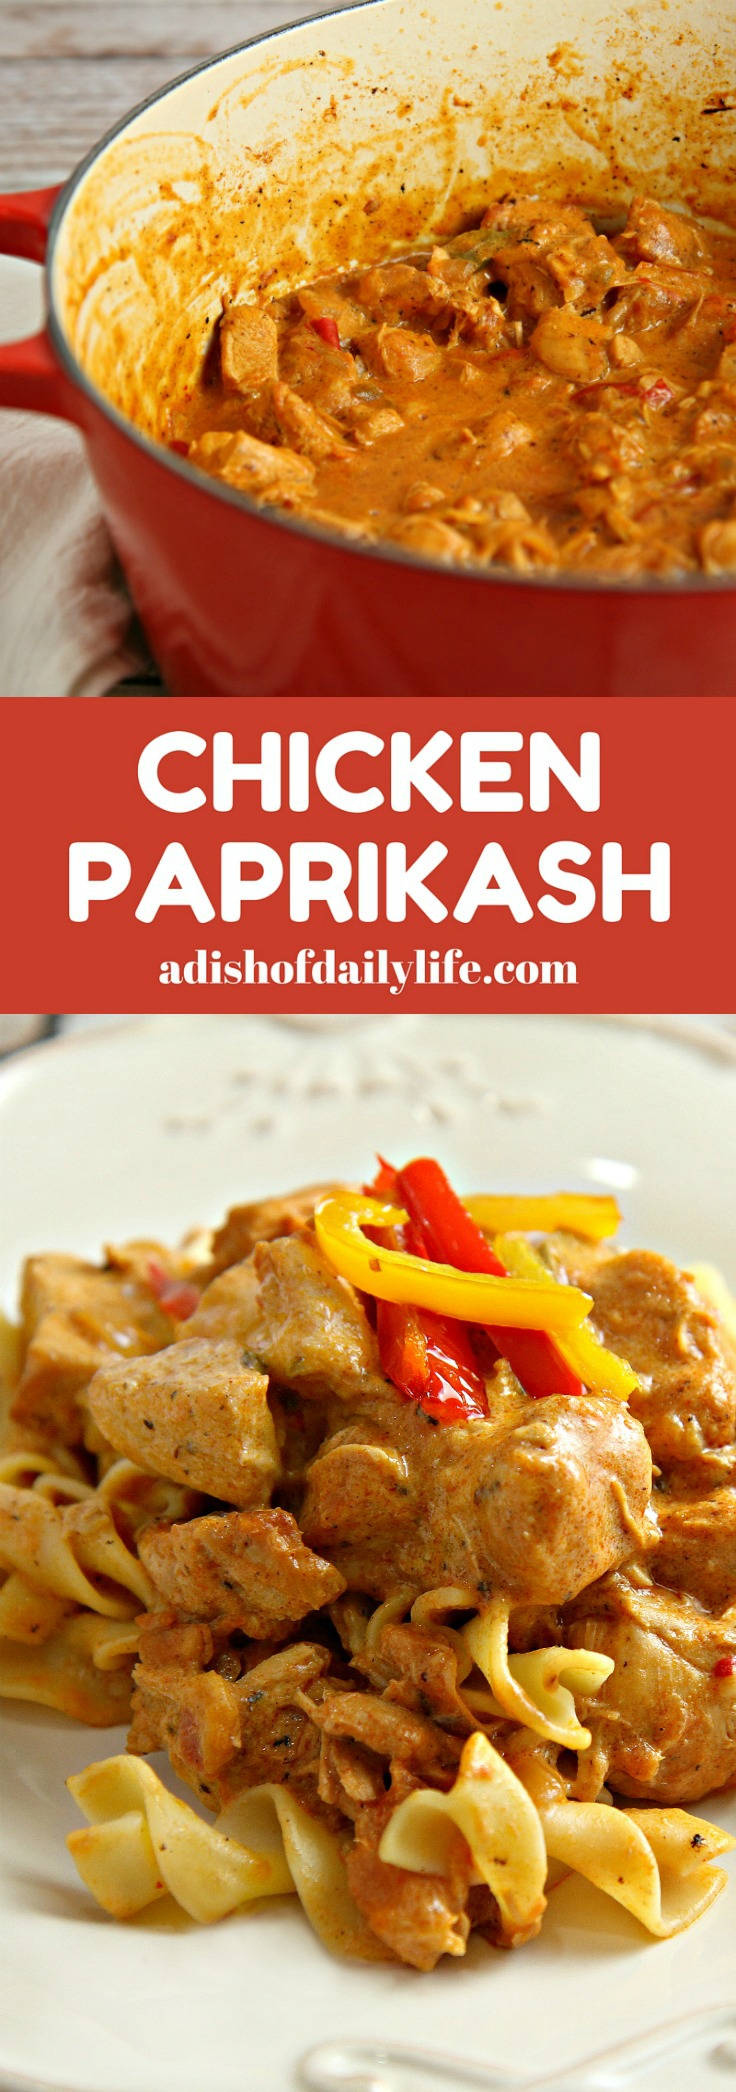 Creamy and delicious, this Hungarian Chicken Paprikash recipe is an easy comfort food dish with a minimum of prep time, perfect for a weeknight dinner! 